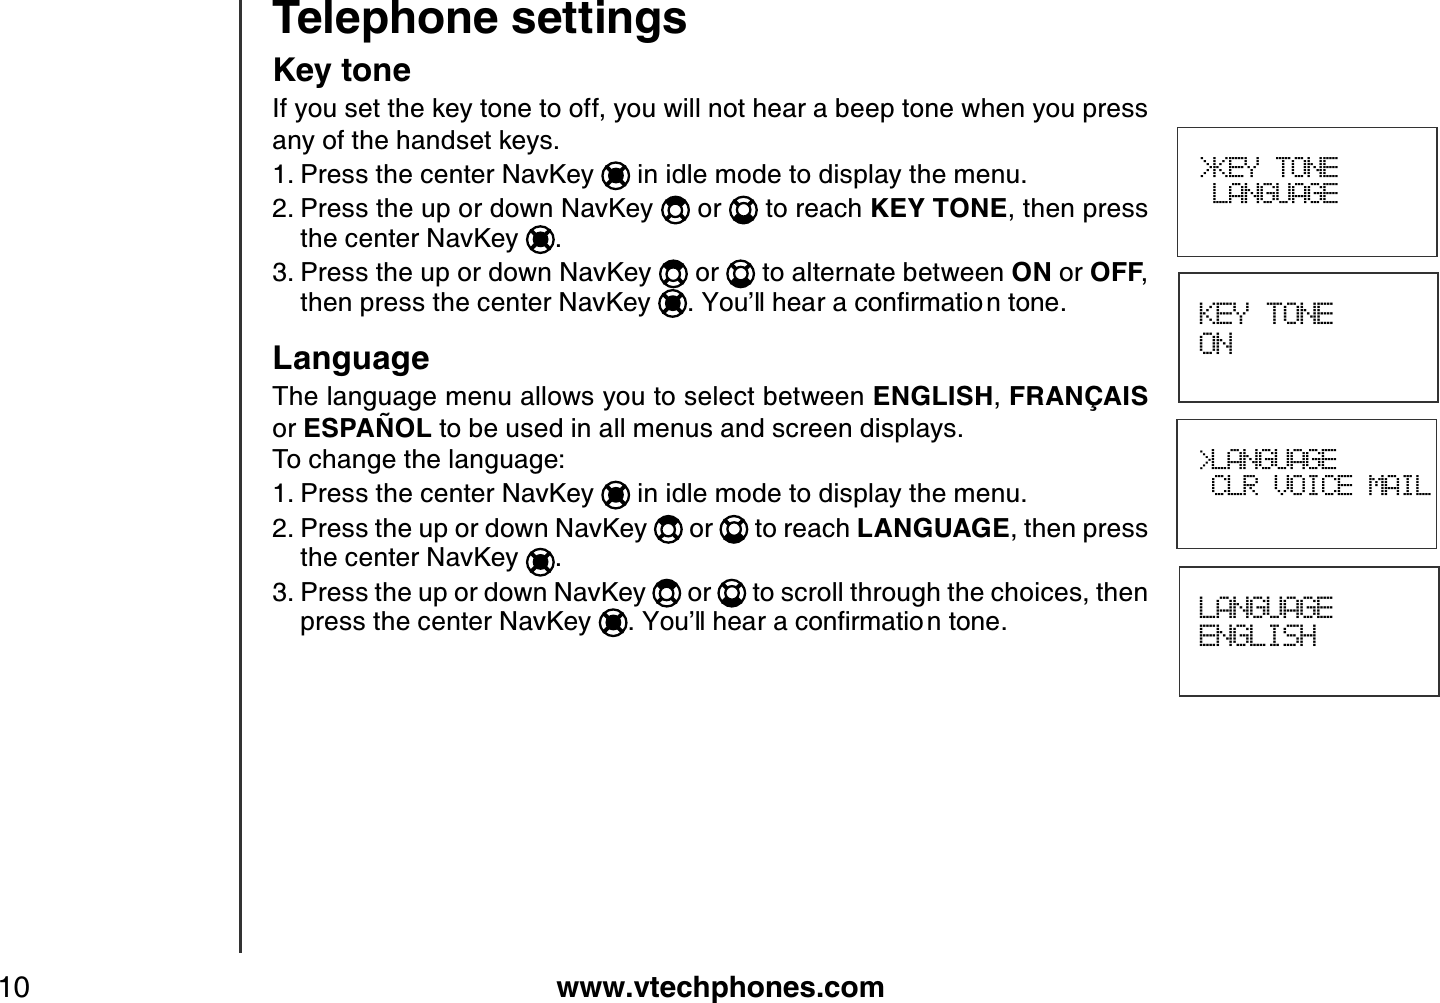 www.vtechphones.com10Telephone settings KEY TONE ONLANGUAGEENGLISH&gt;KEY TONE LANGUAGEKey toneIf you set the key tone to off, you will not hear a beep tone when you press any of the handset keys.Press the center NavKey   in idle mode to display the menu.Press the up or down NavKey   or   to reach KEY TONE, then press the center NavKey  .Press the up or down NavKey   or   to alternate between ON or OFF,then press the center NavKey  .;QWŏNNJGCTCEQPſTOCVKQ PVQPGLanguageThe language menu allows you to select between ENGLISH,FRANÇ AISor ESPAÑ OL to be used in all menus and screen displays.To change the language:Press the center NavKey   in idle mode to display the menu.Press the up or down NavKey   or   to reach LANGUAGE, then press the center NavKey  .Press the up or down NavKey   or   to scroll through the choices, then press the center NavKey  ;QWŏNNJGCTCEQPſTOCVKQ PVQPG1.2.3.1.2.3.&gt;LANGUAGECLR VOICE MAIL